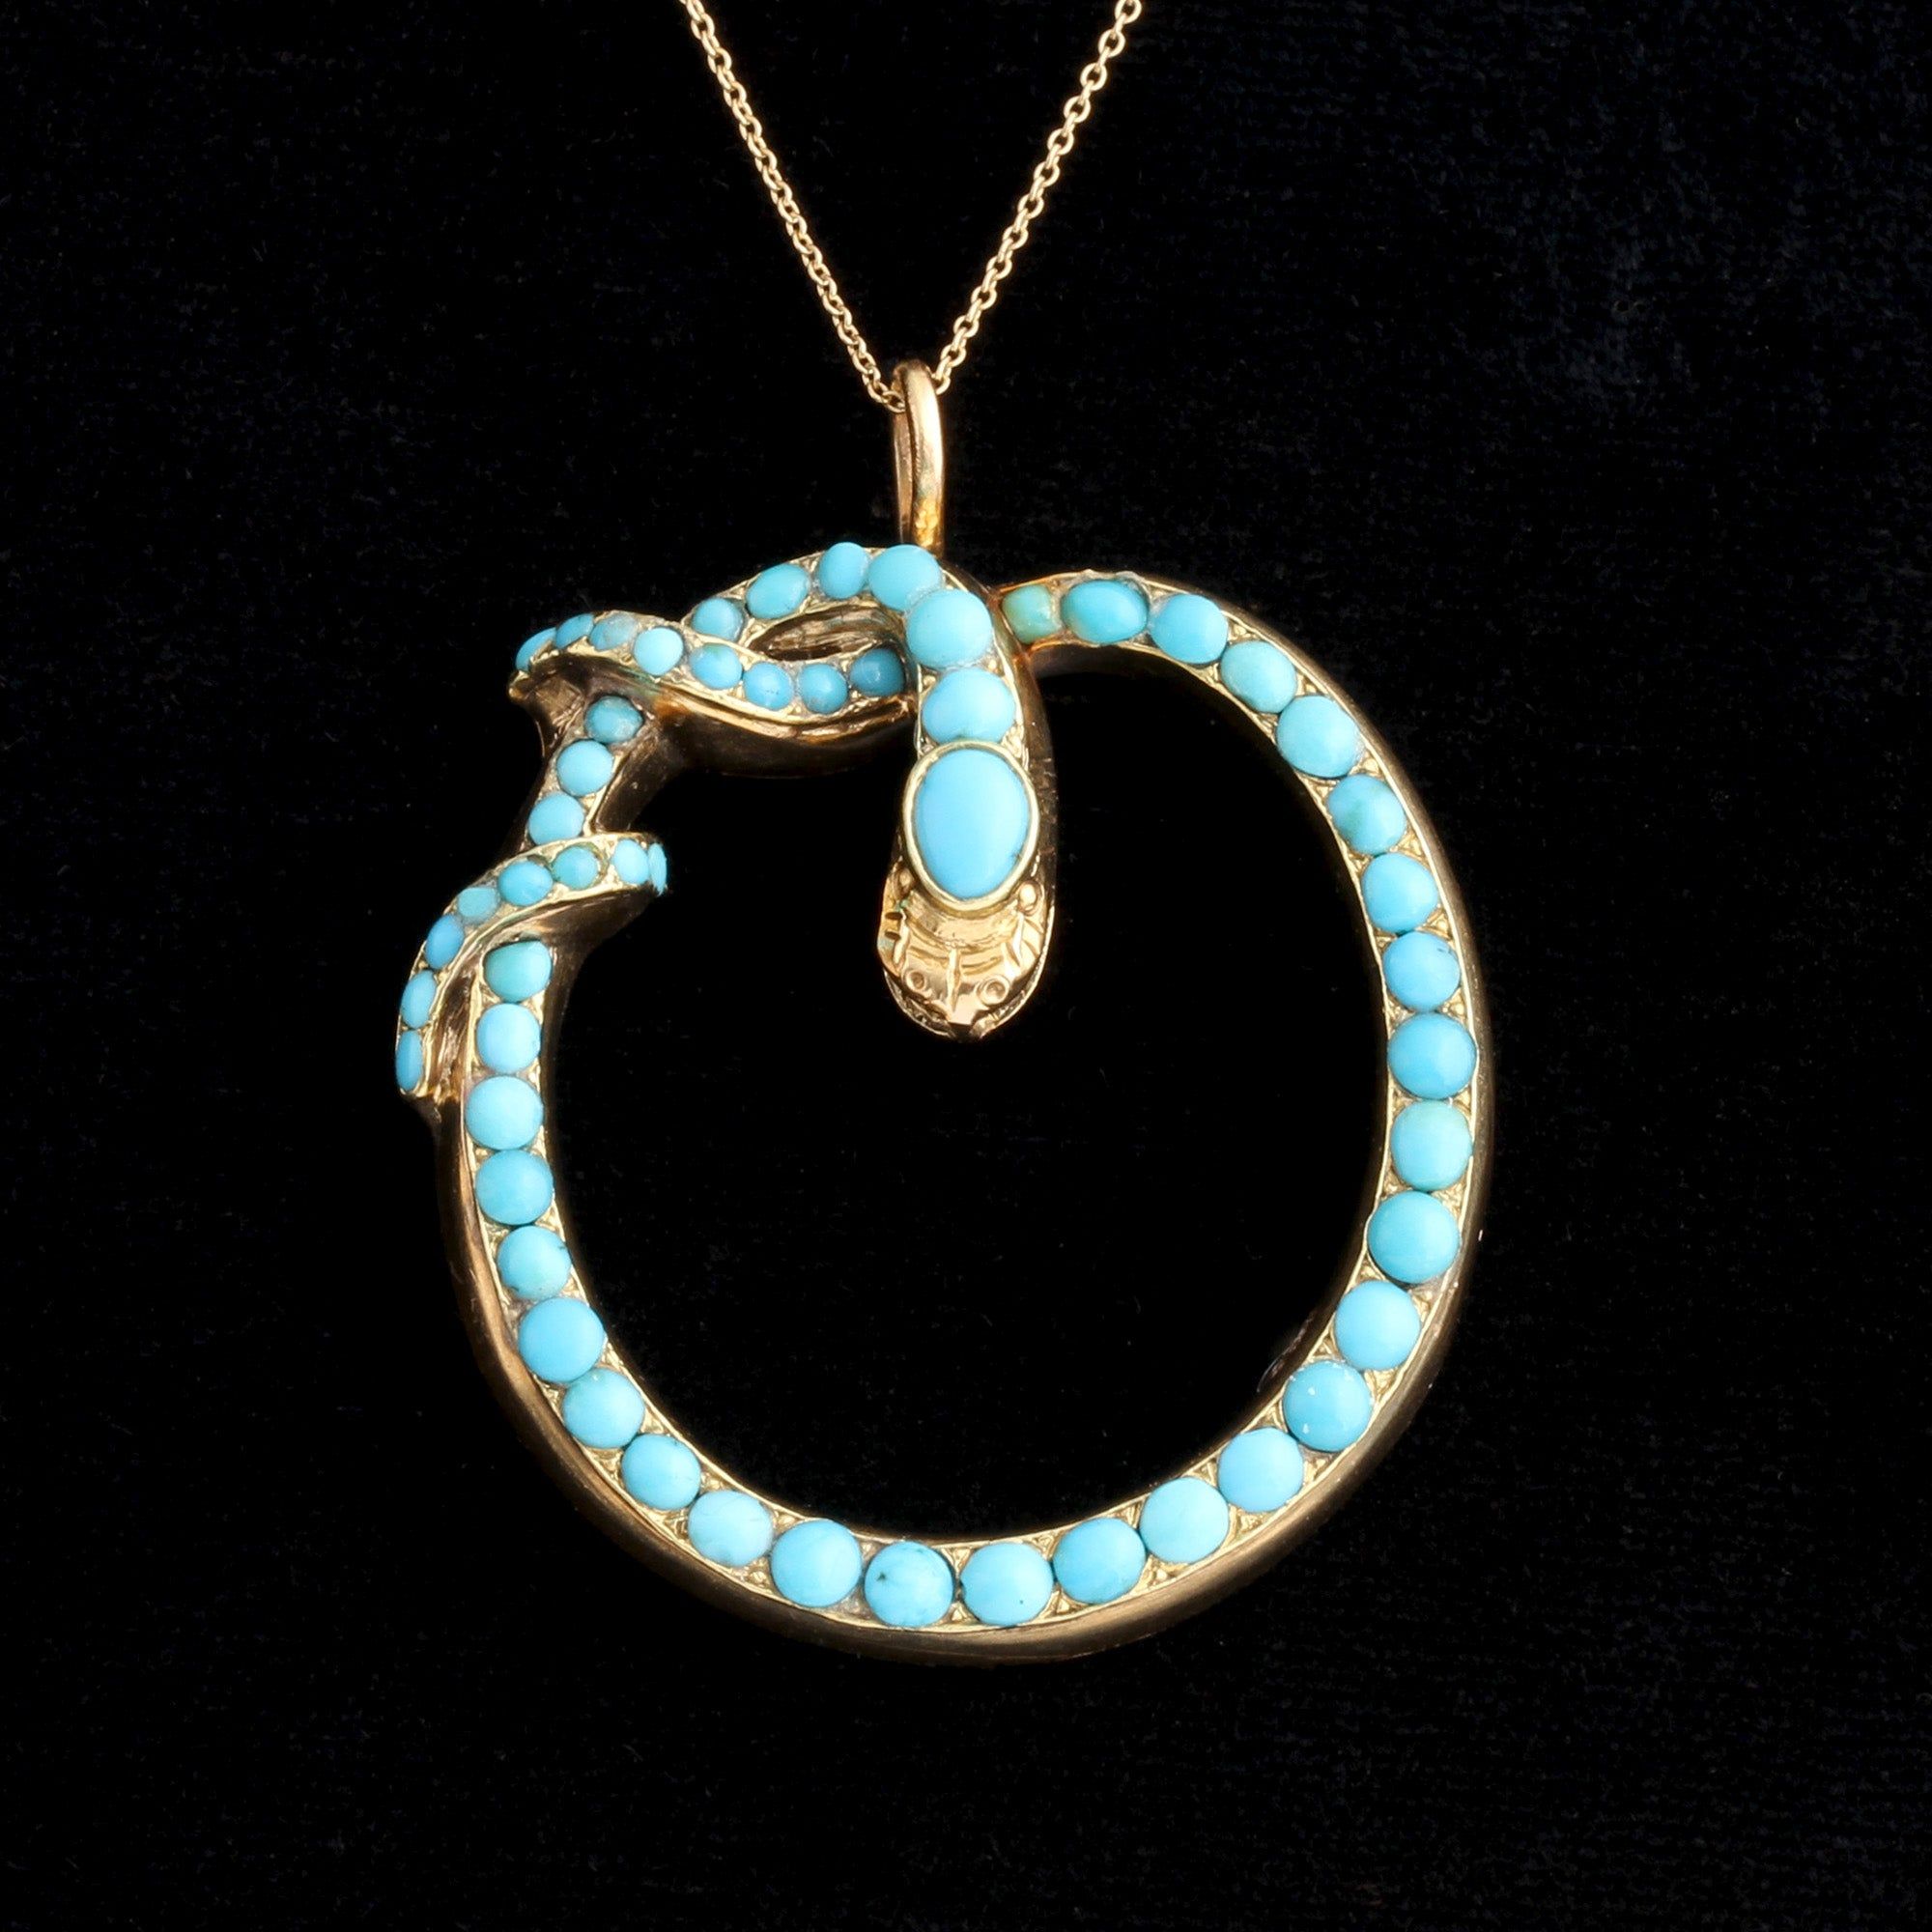 Victorian Turquoise Snake Necklace